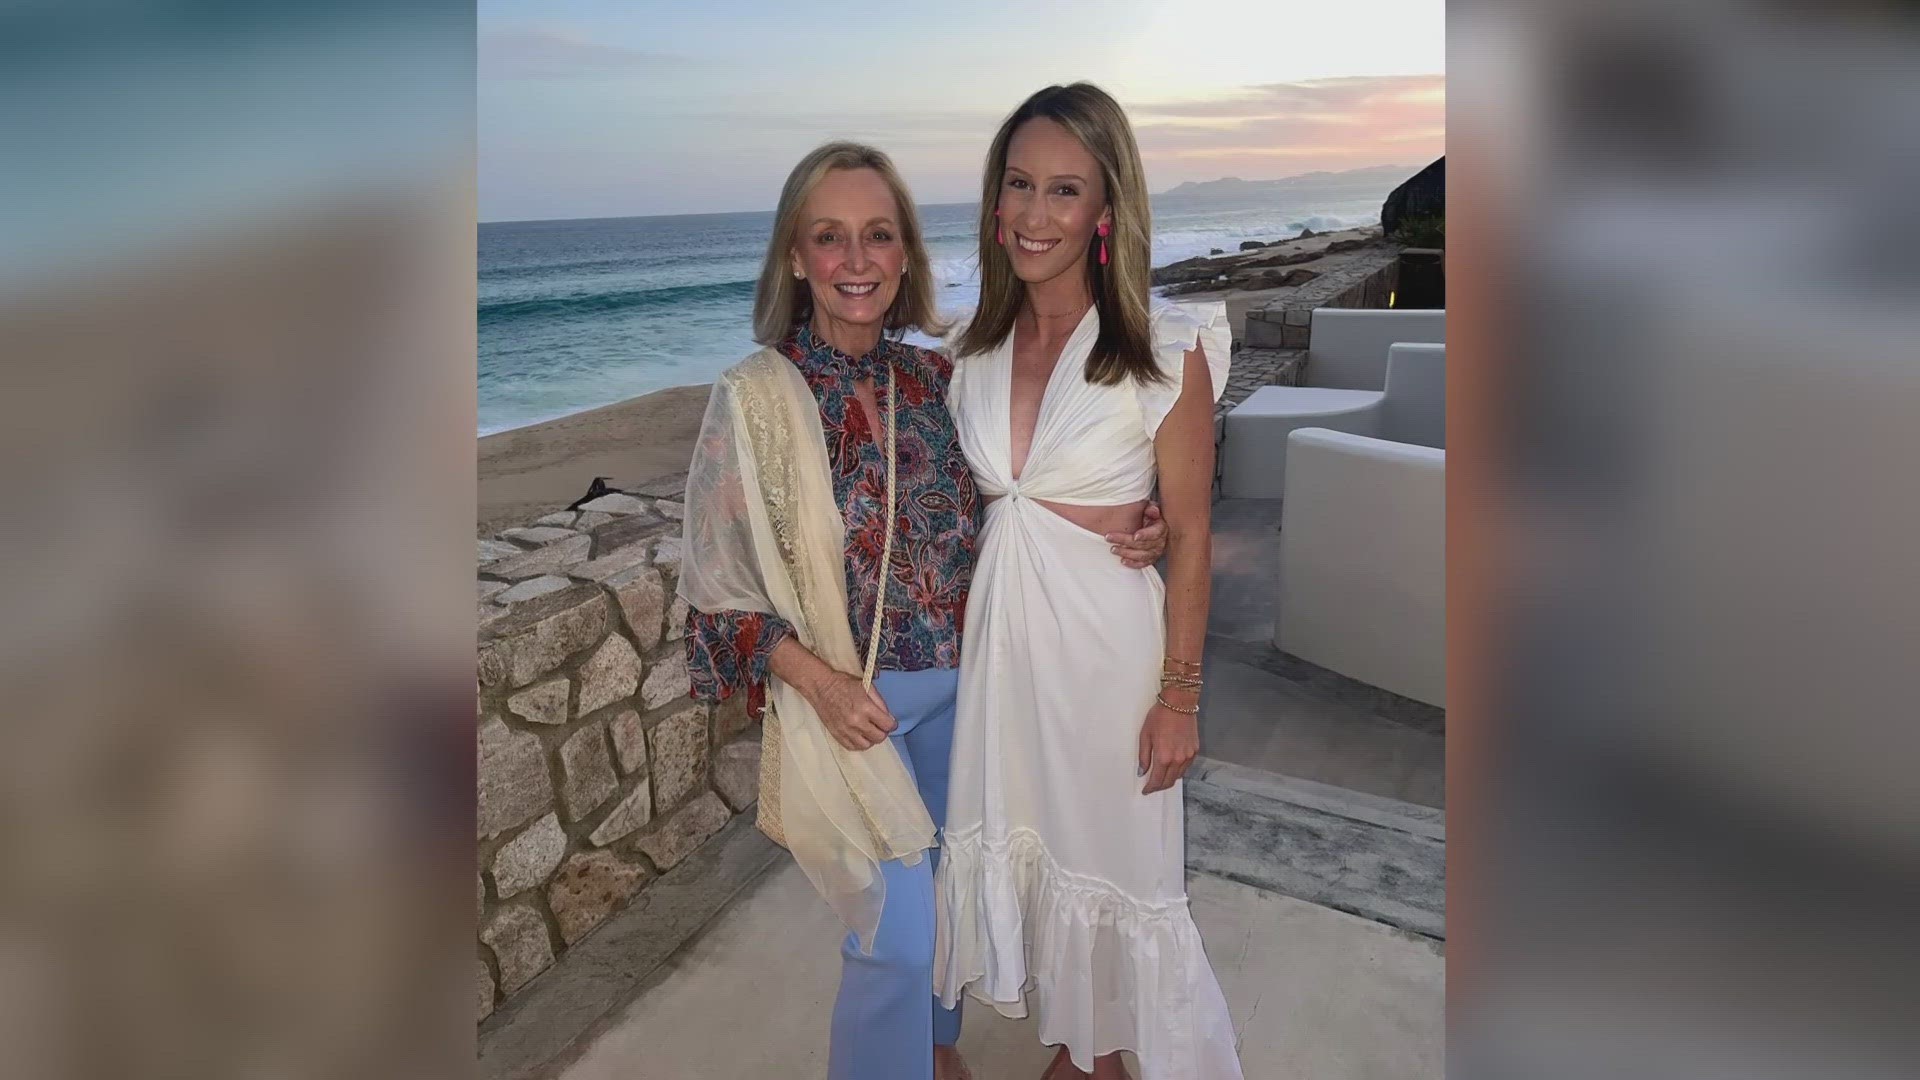 6 Sports anchor, Nicole Shearin, says Happy Mother's Day to her very special mom, Cindy Shearin.